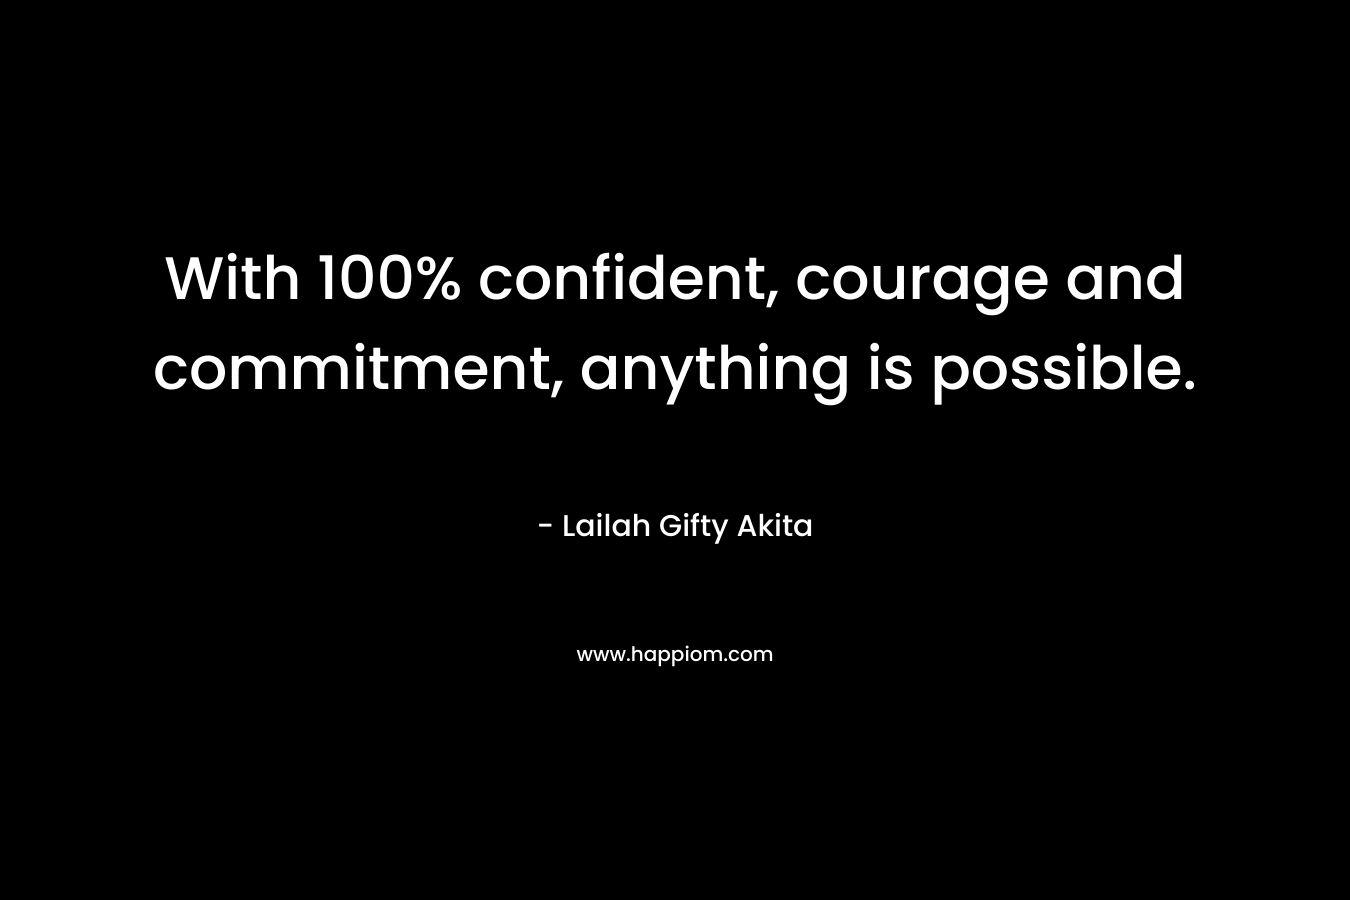 With 100% confident, courage and commitment, anything is possible.